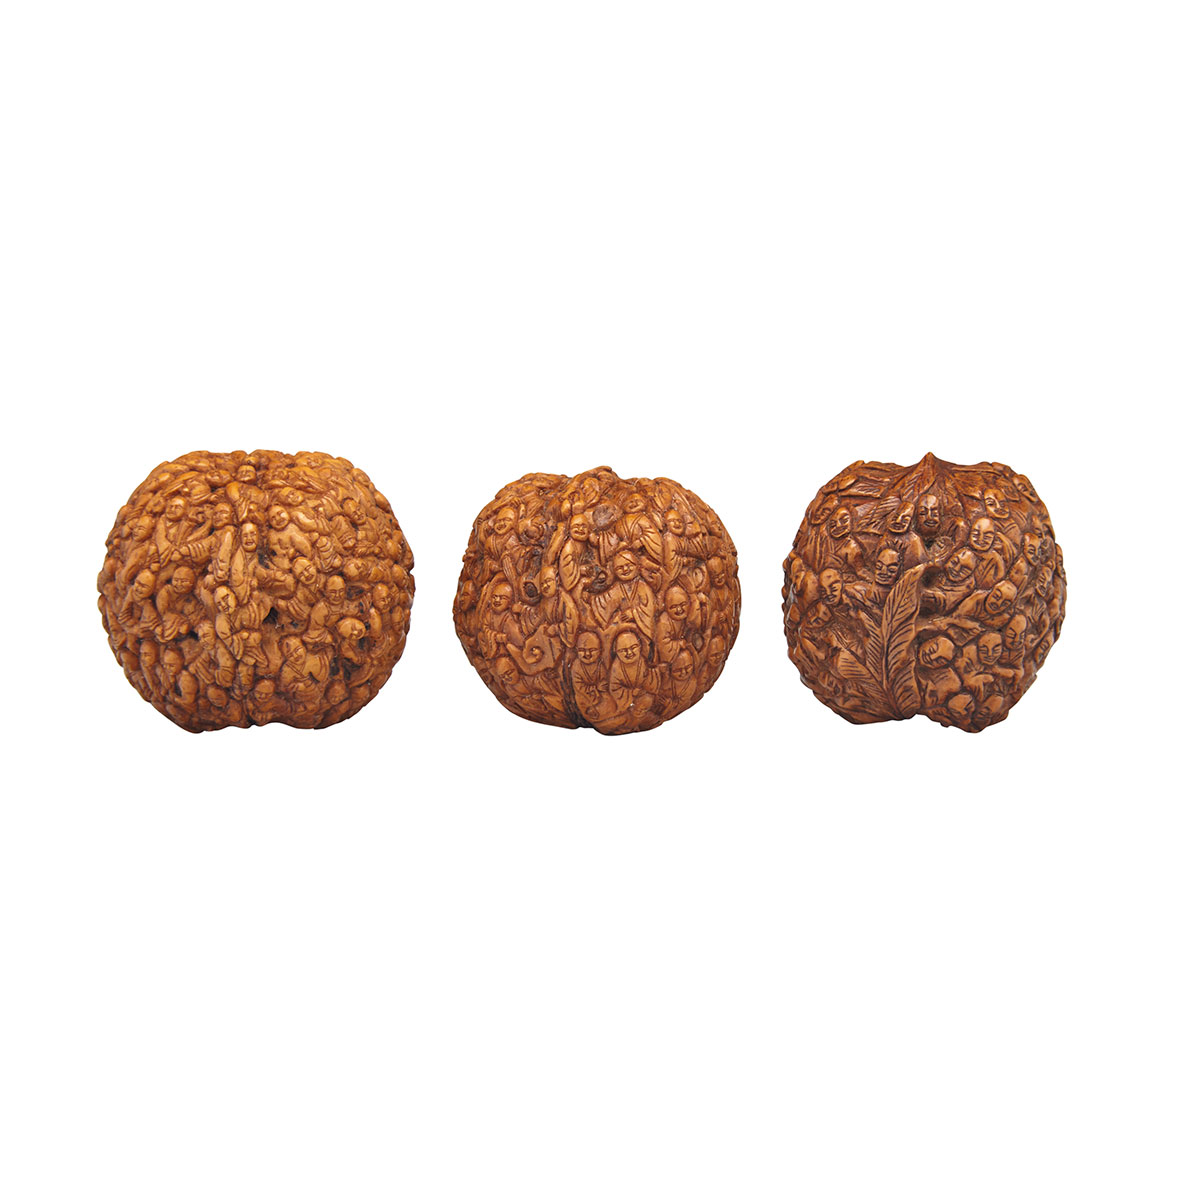 Three Well-Carved Large Walnuts